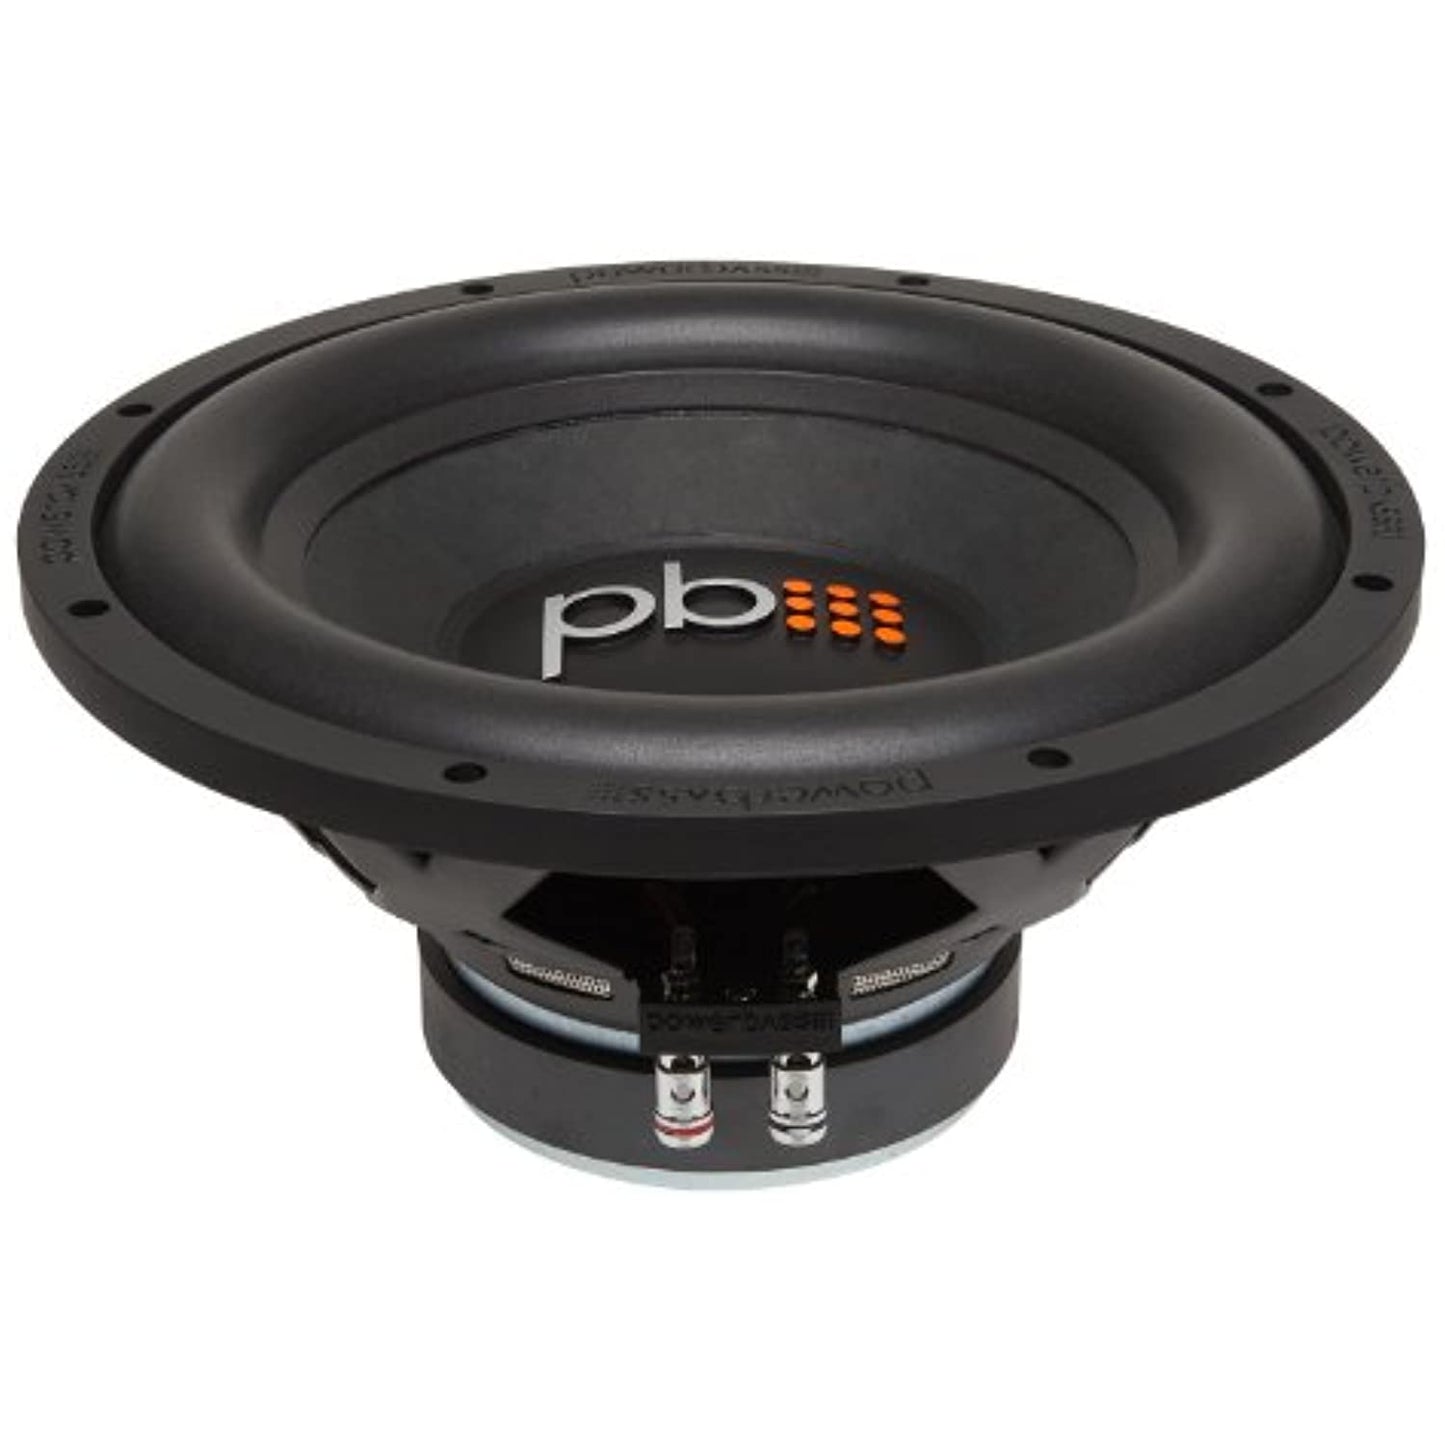 Powerbass S-1204 12" Single 4 Ω Subwoofer 600W Max (S1204)